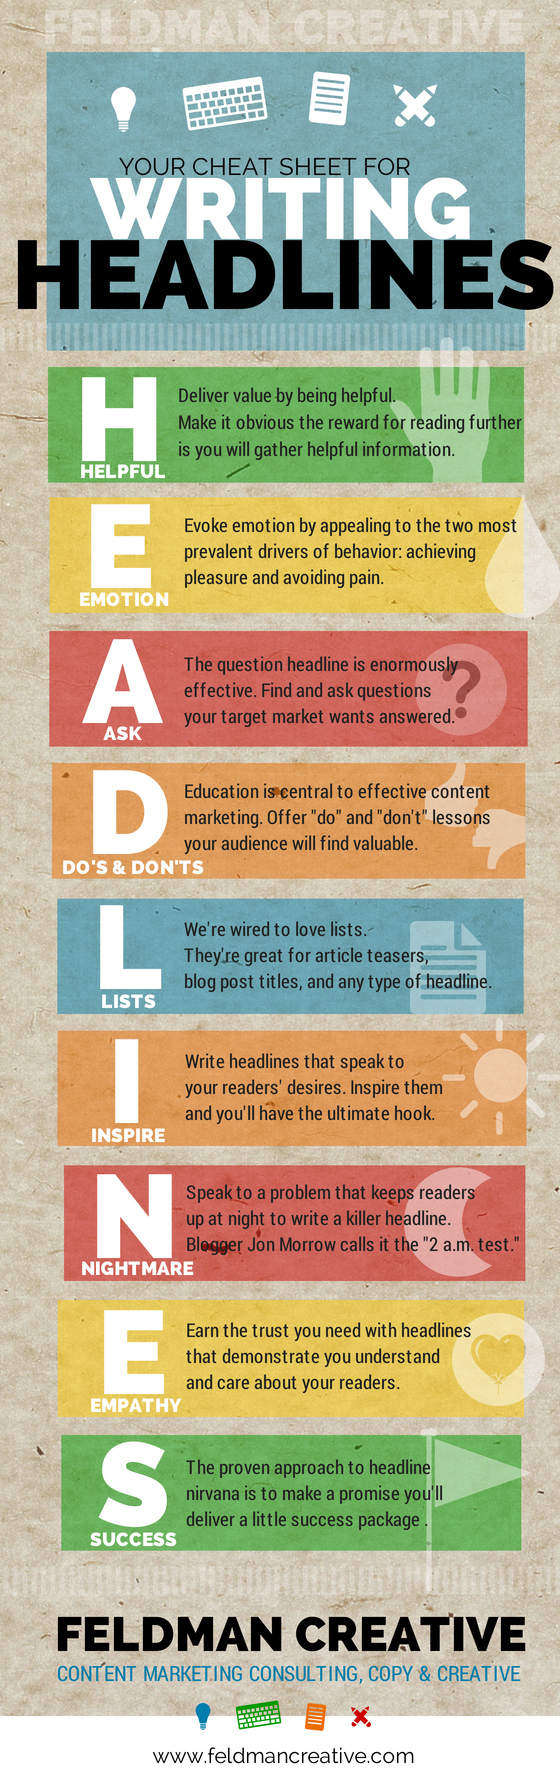 9 Unforgettable Tips for Writing Headlines that Work